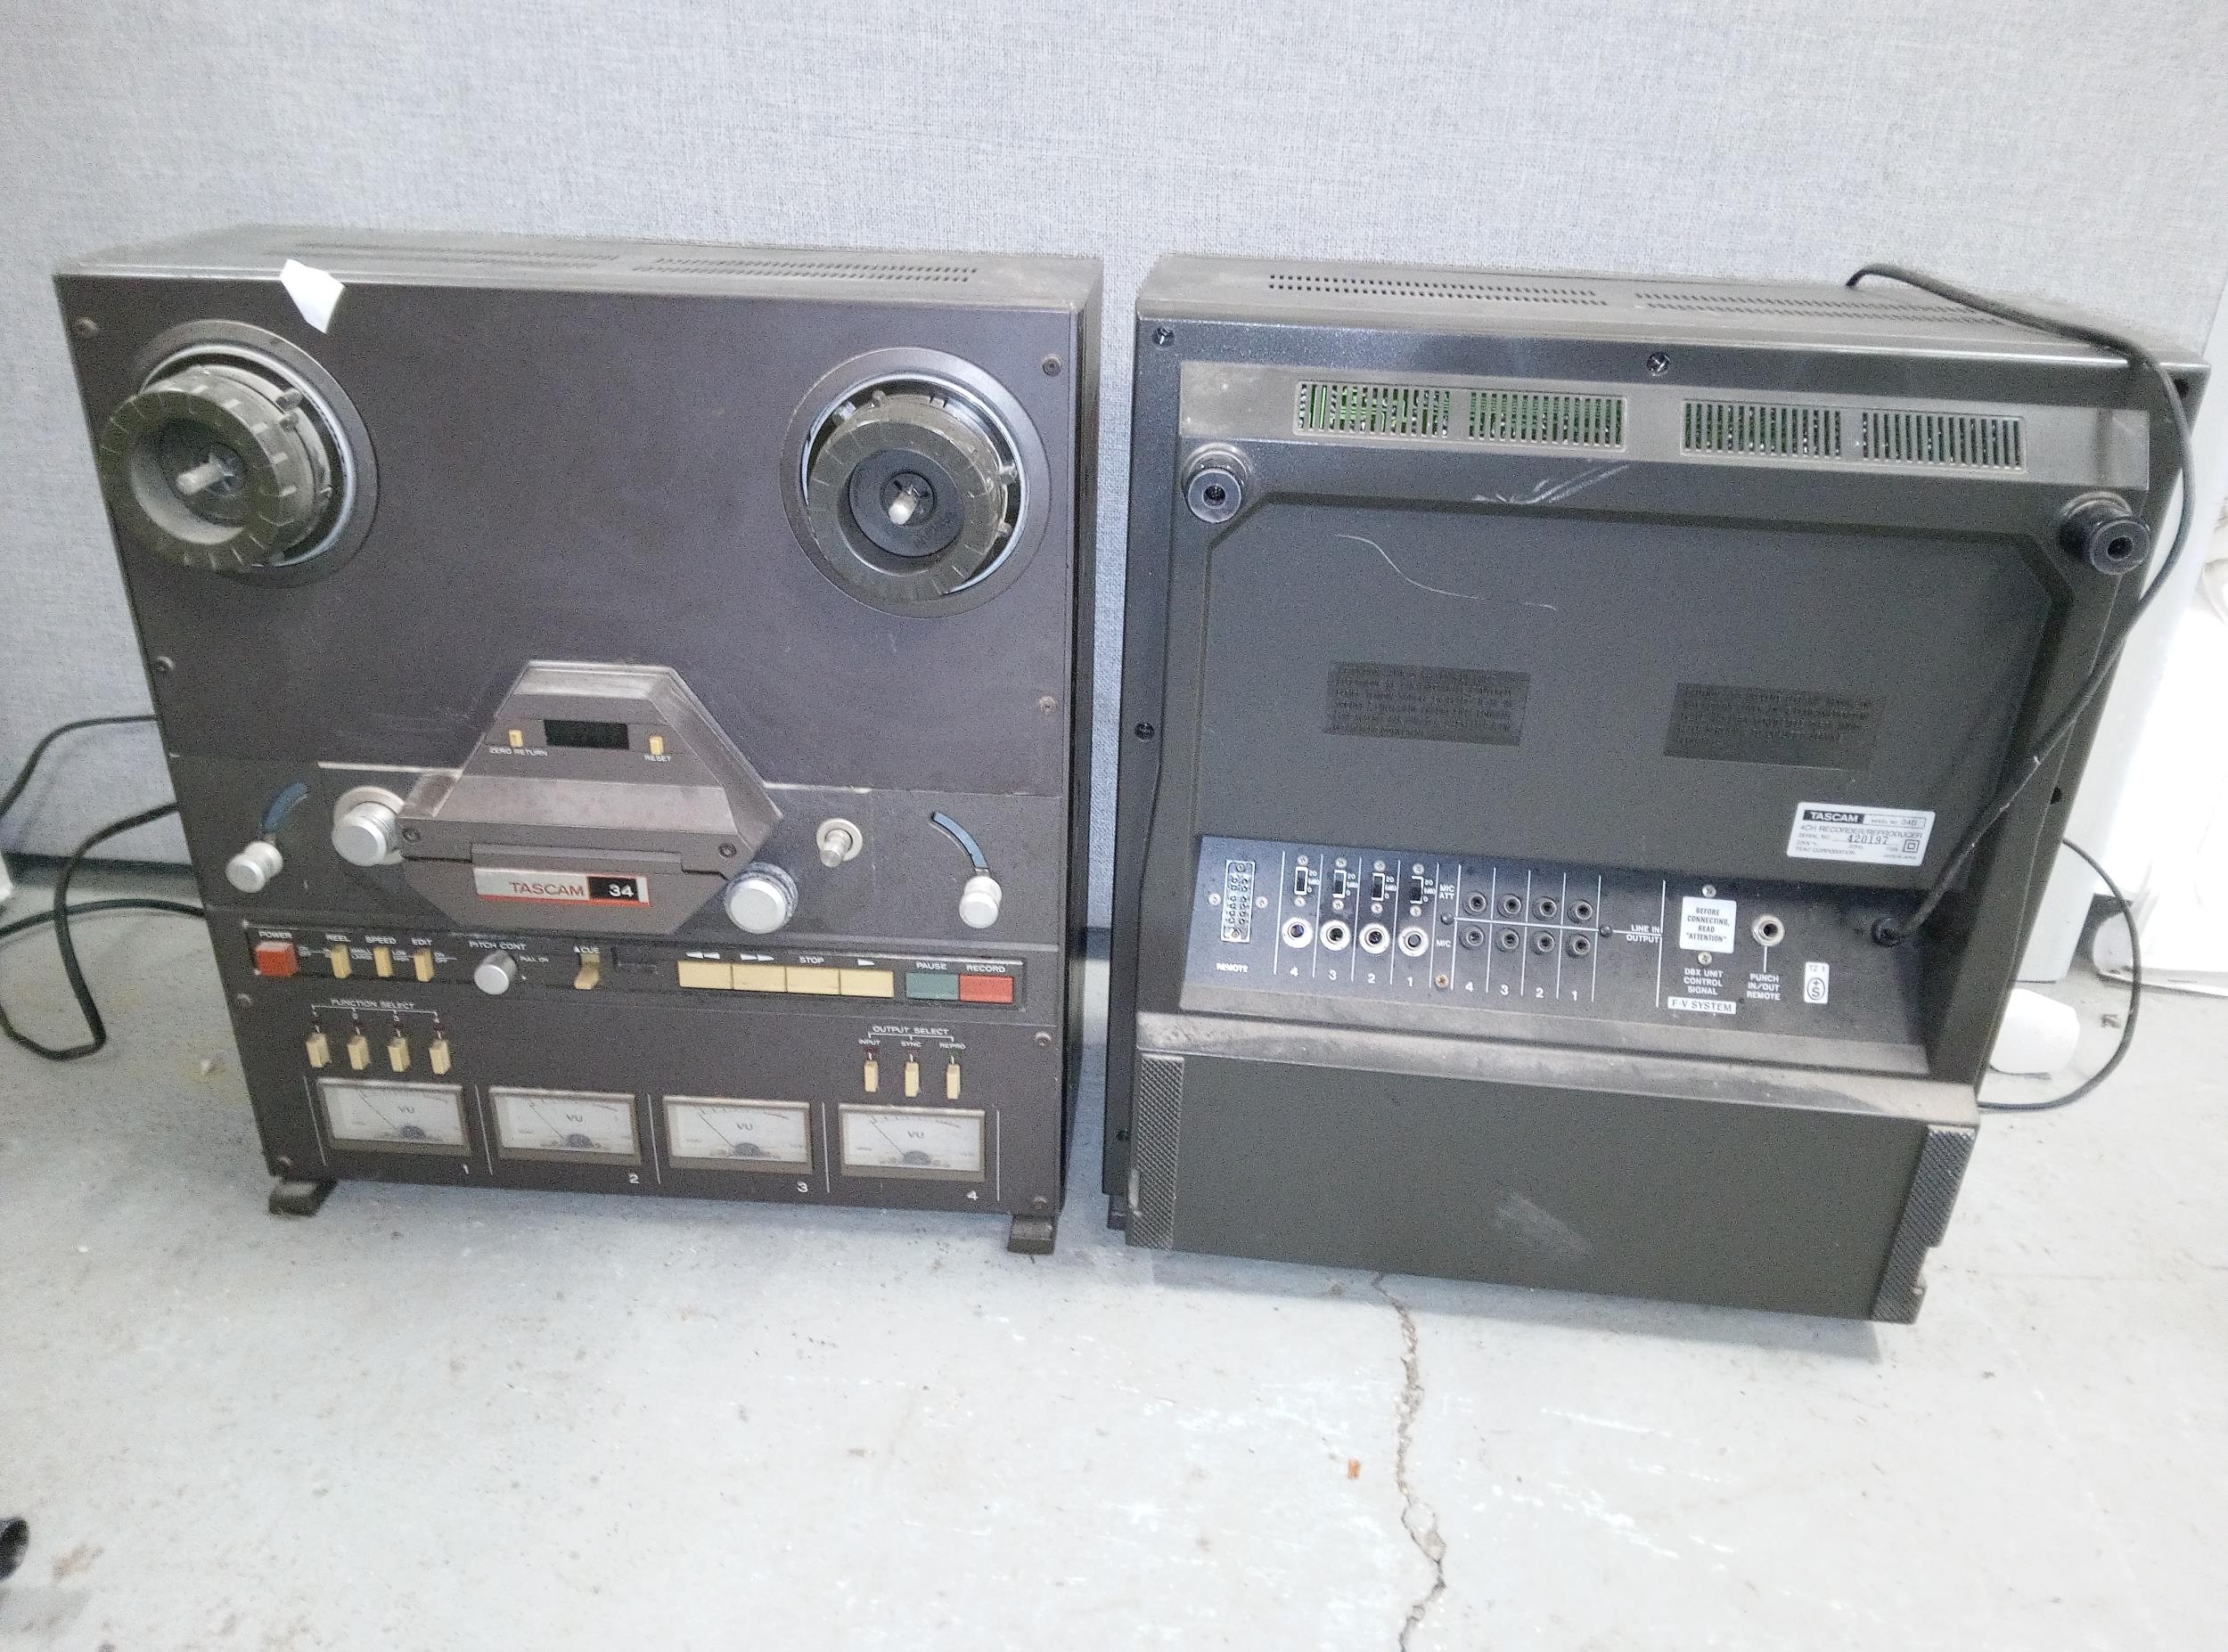 TASCAM 34 and 34B Reel to Reel Tape Players.